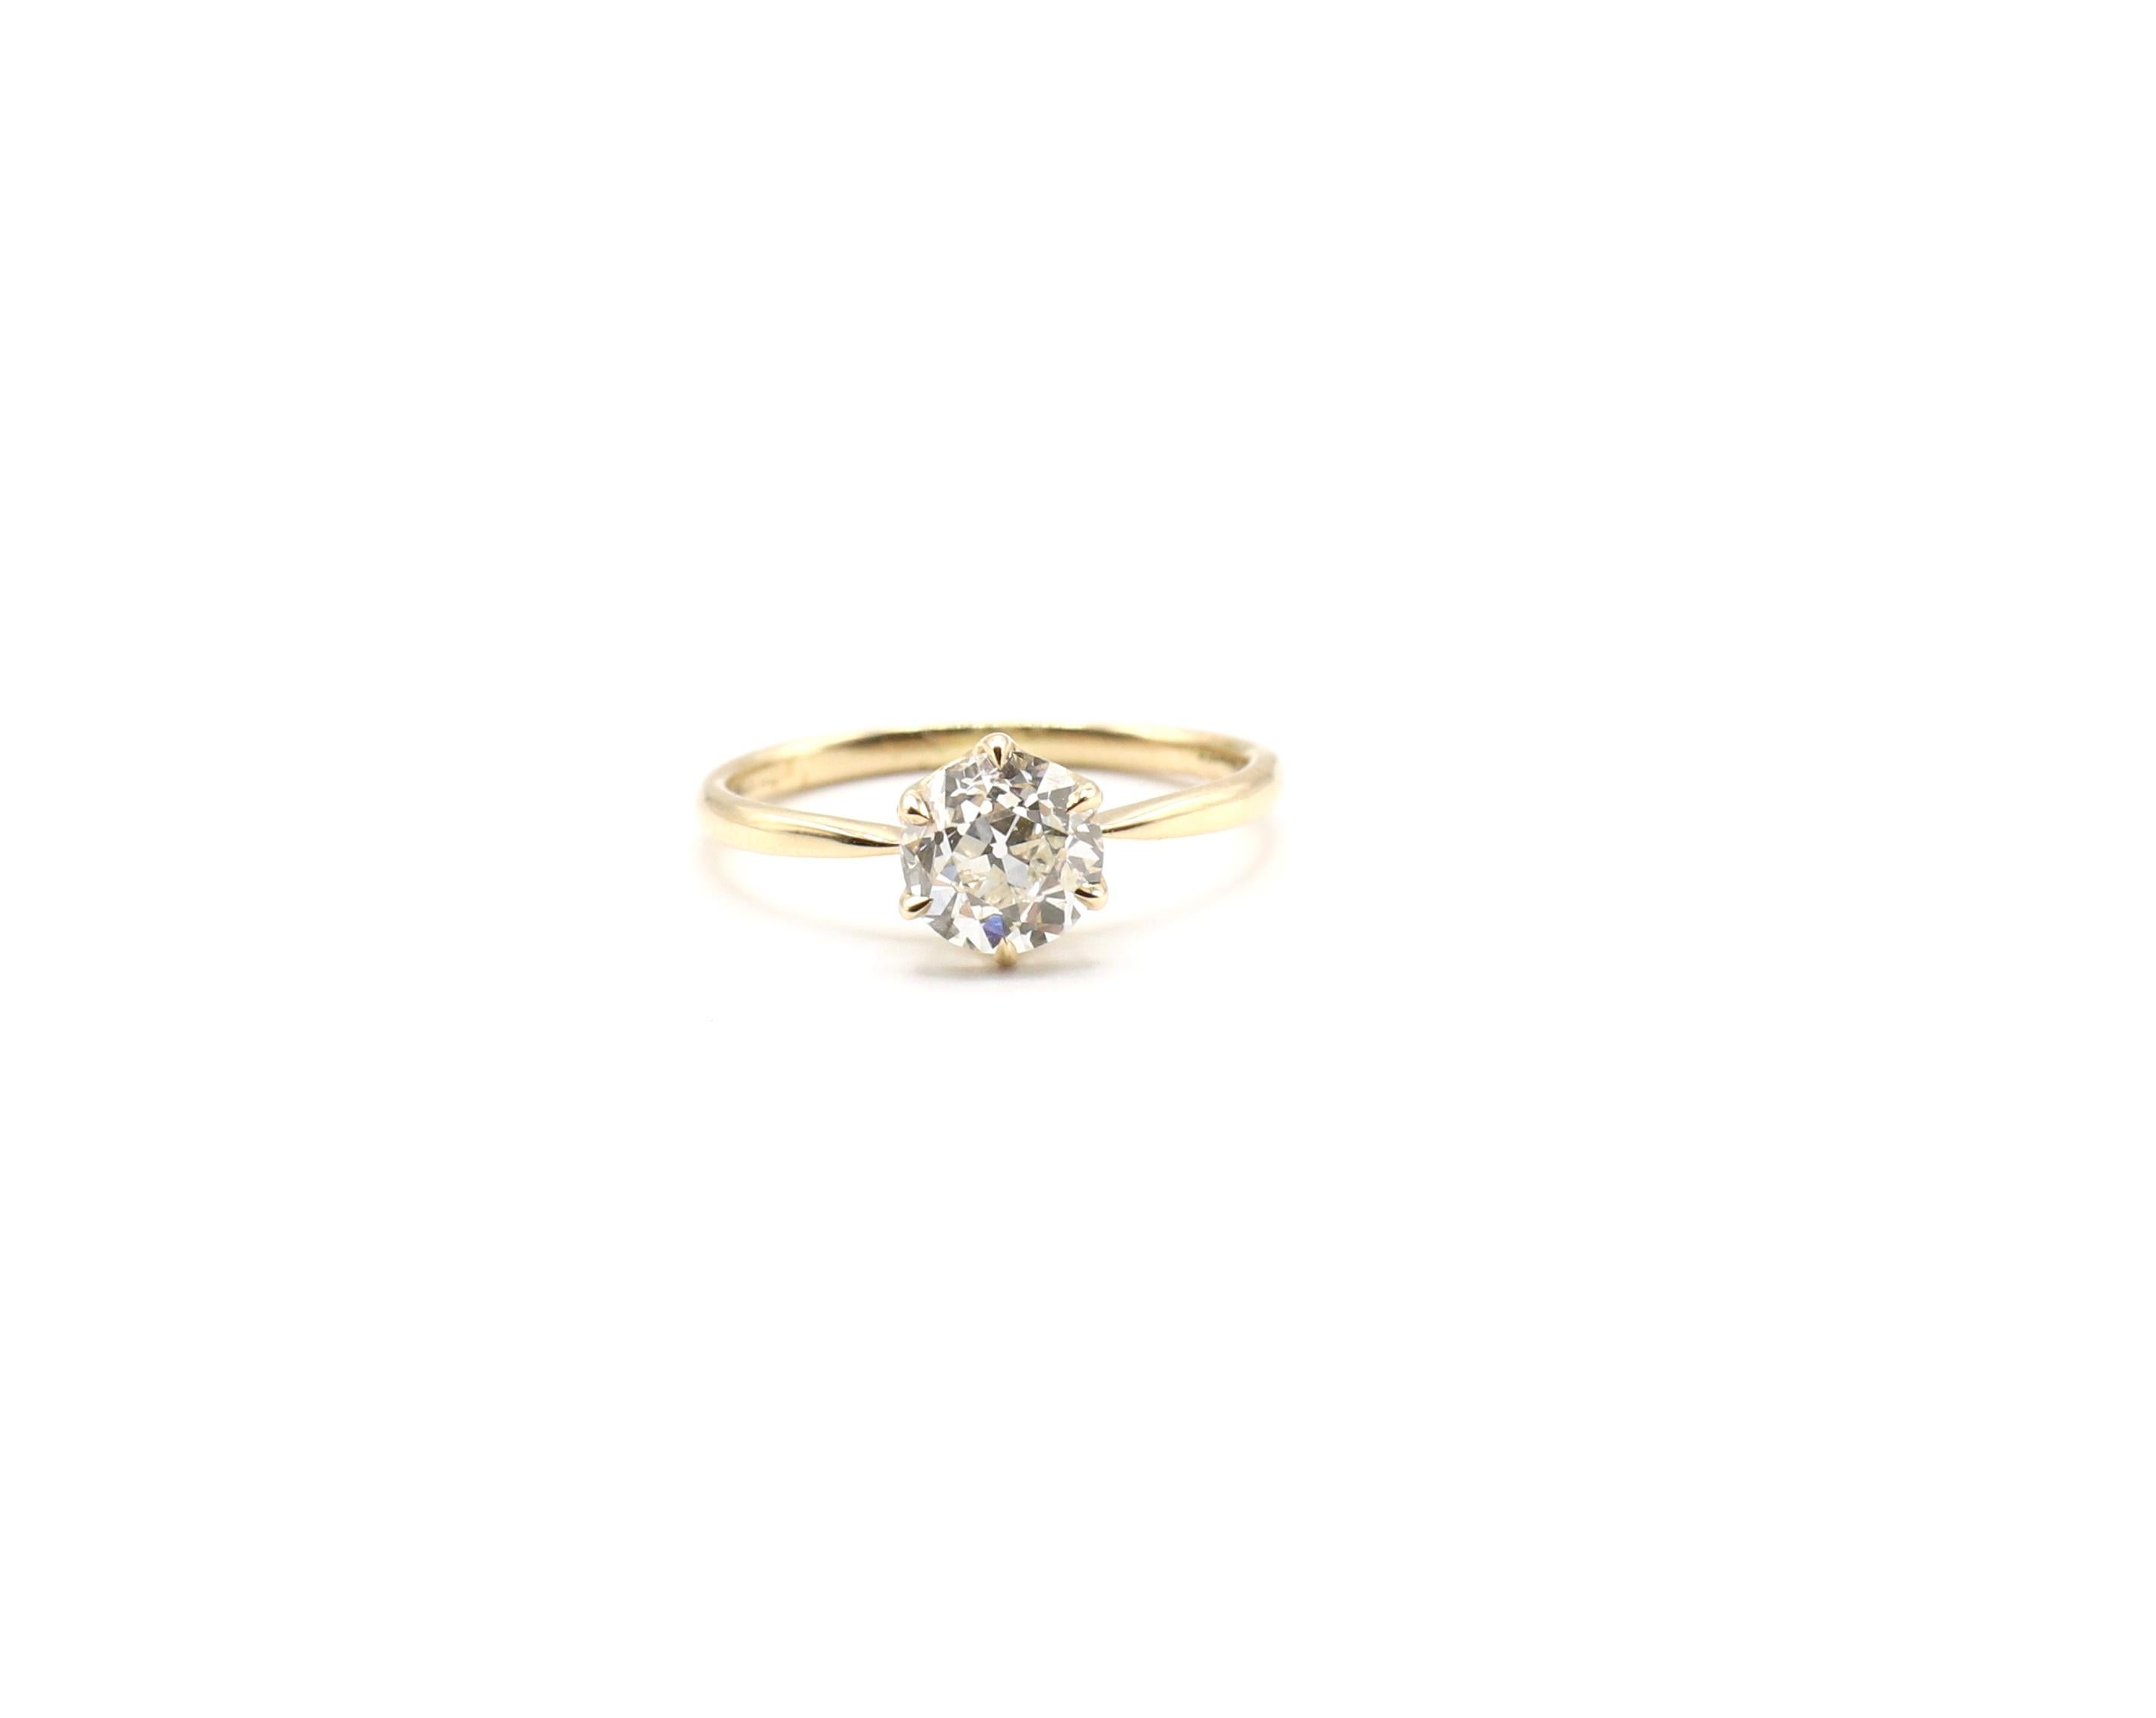 GIA 0.98ct Old European Brilliant Diamond 18k Yellow Gold Solitaire Engagement Ring Crown Settings Size 5

GIA Report Number: 5192905339 (please note report details pictured for details)
Metal: 18k Yellow Gold
Stone: GIA Certified 0.98ct Old